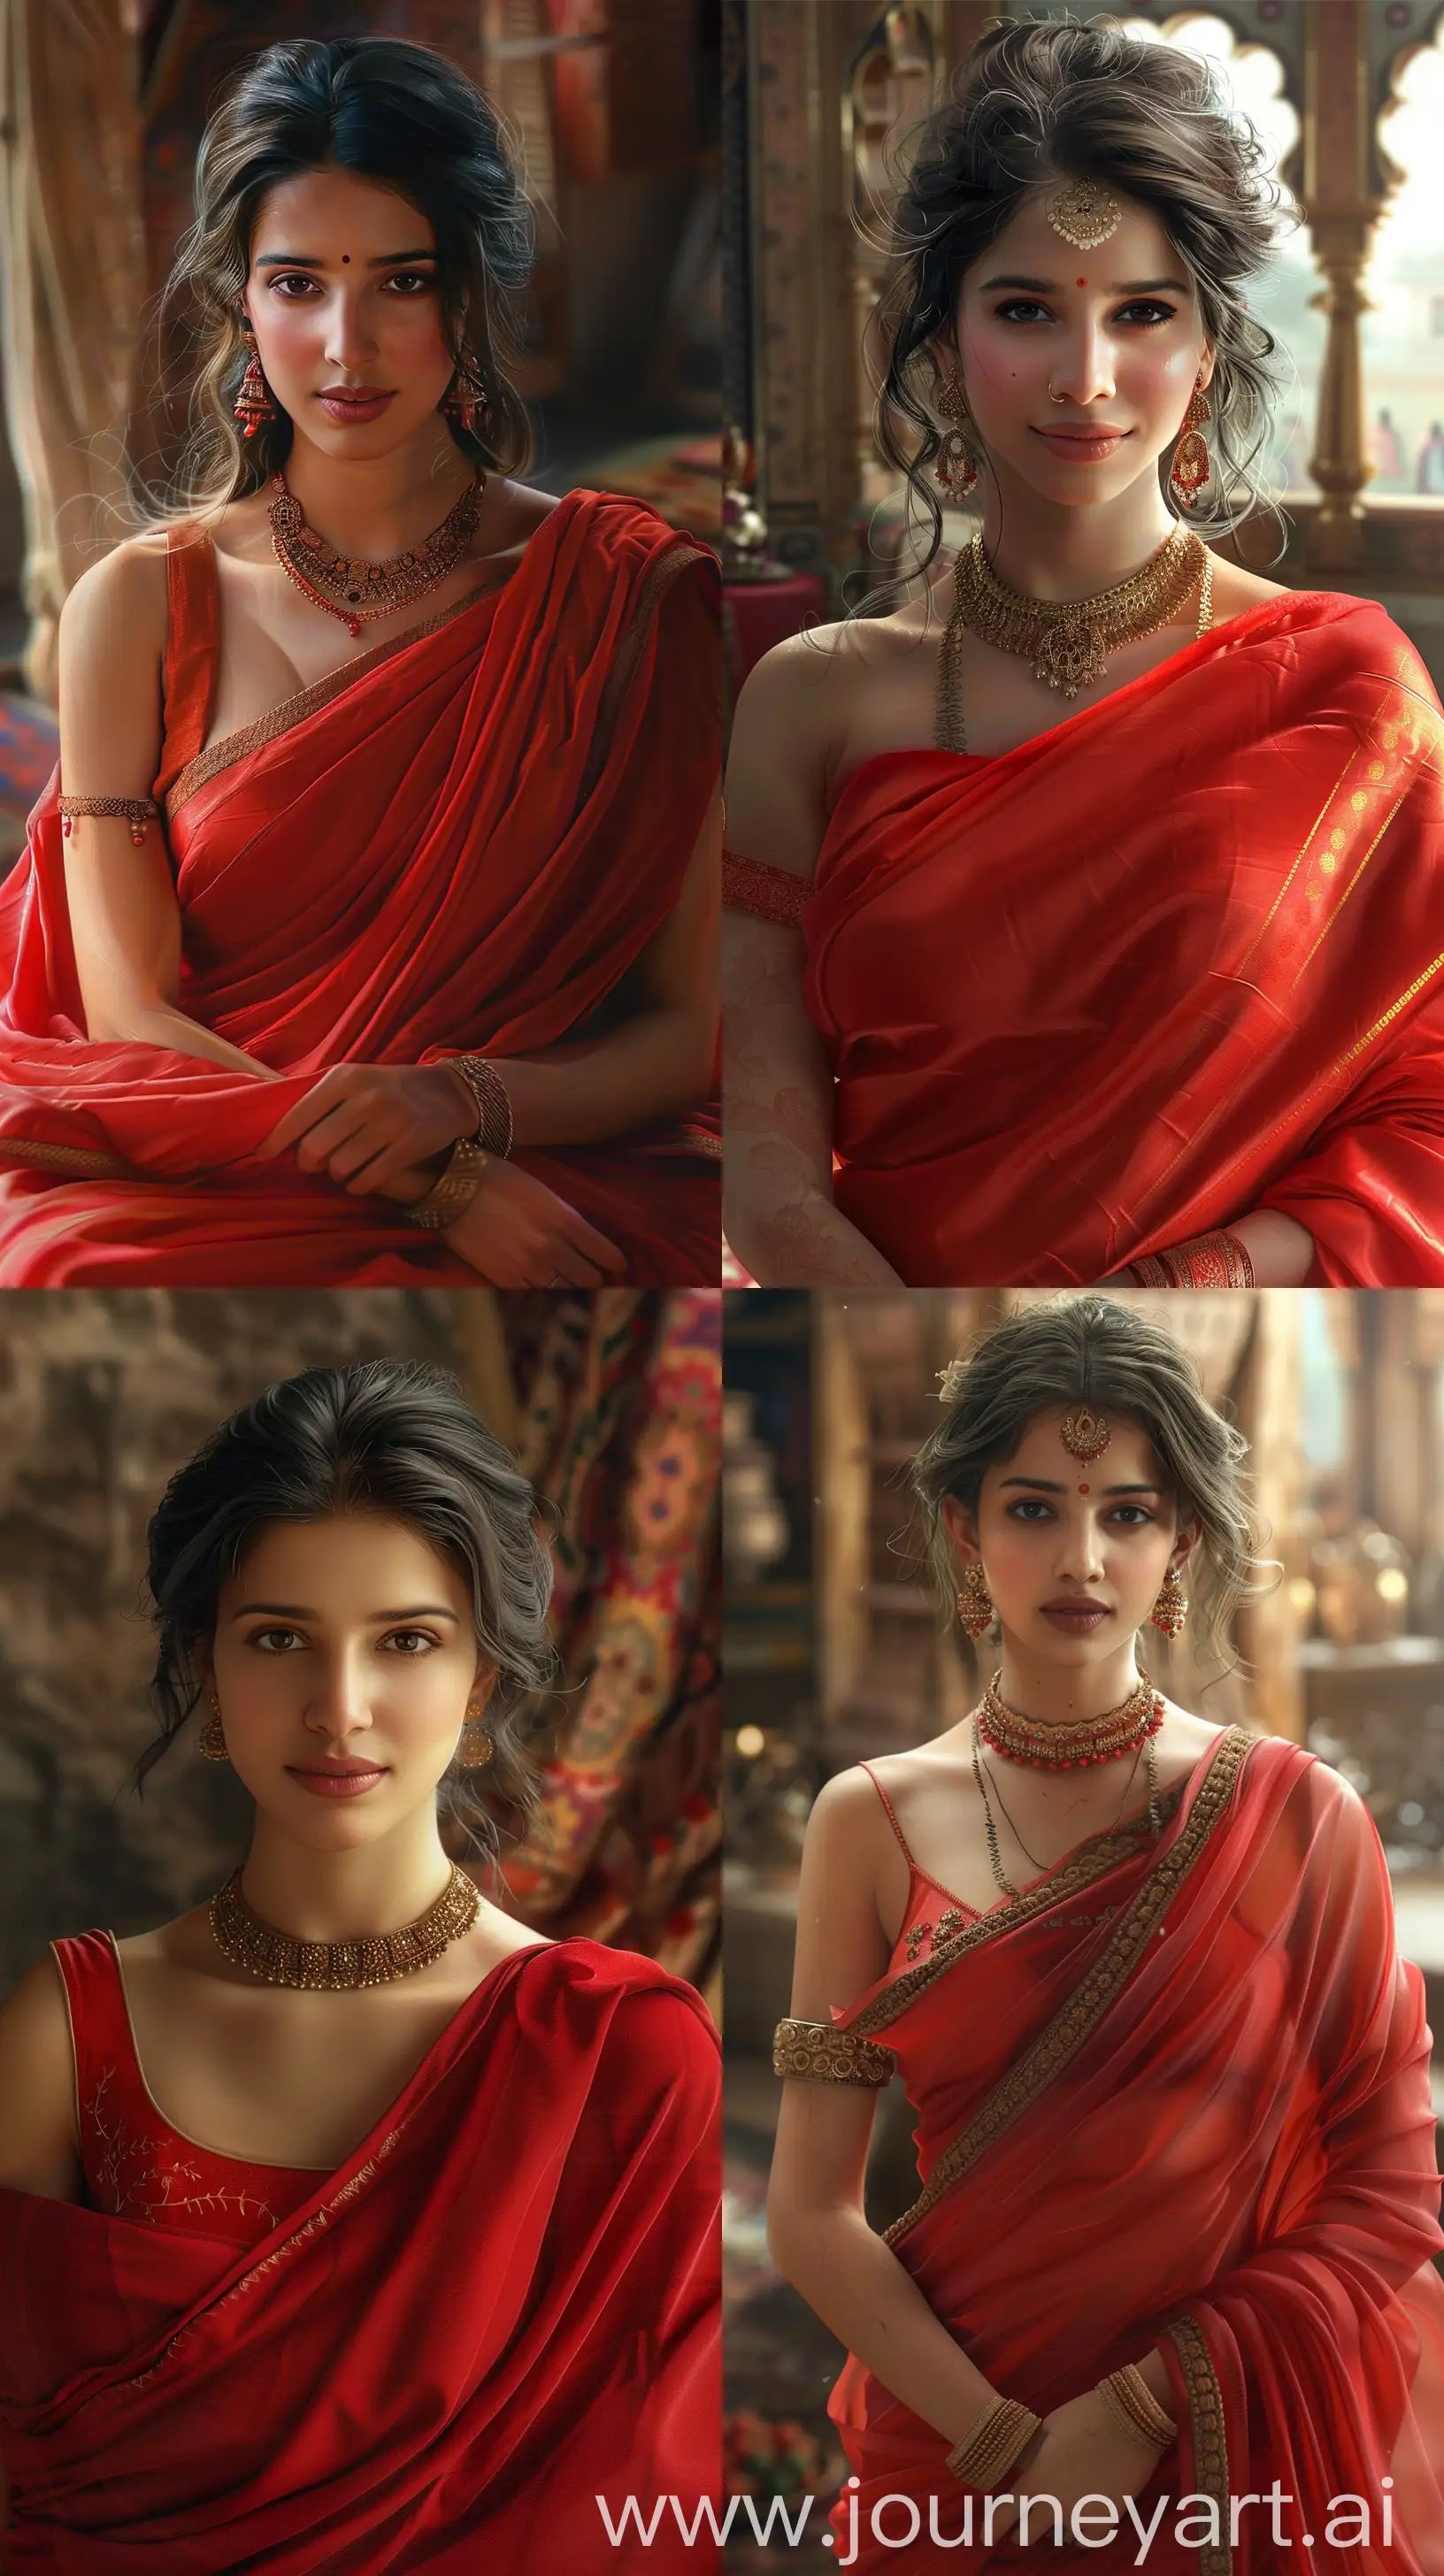 Hyper-realistic image of a Beautiful Indian woman from ancient times in Raj Ravi Varna art style, draped in a red saree, simple lifestyle, close-up image, indoors, cinematic style image in high resolution --s 200 --ar 9:16 --v 6